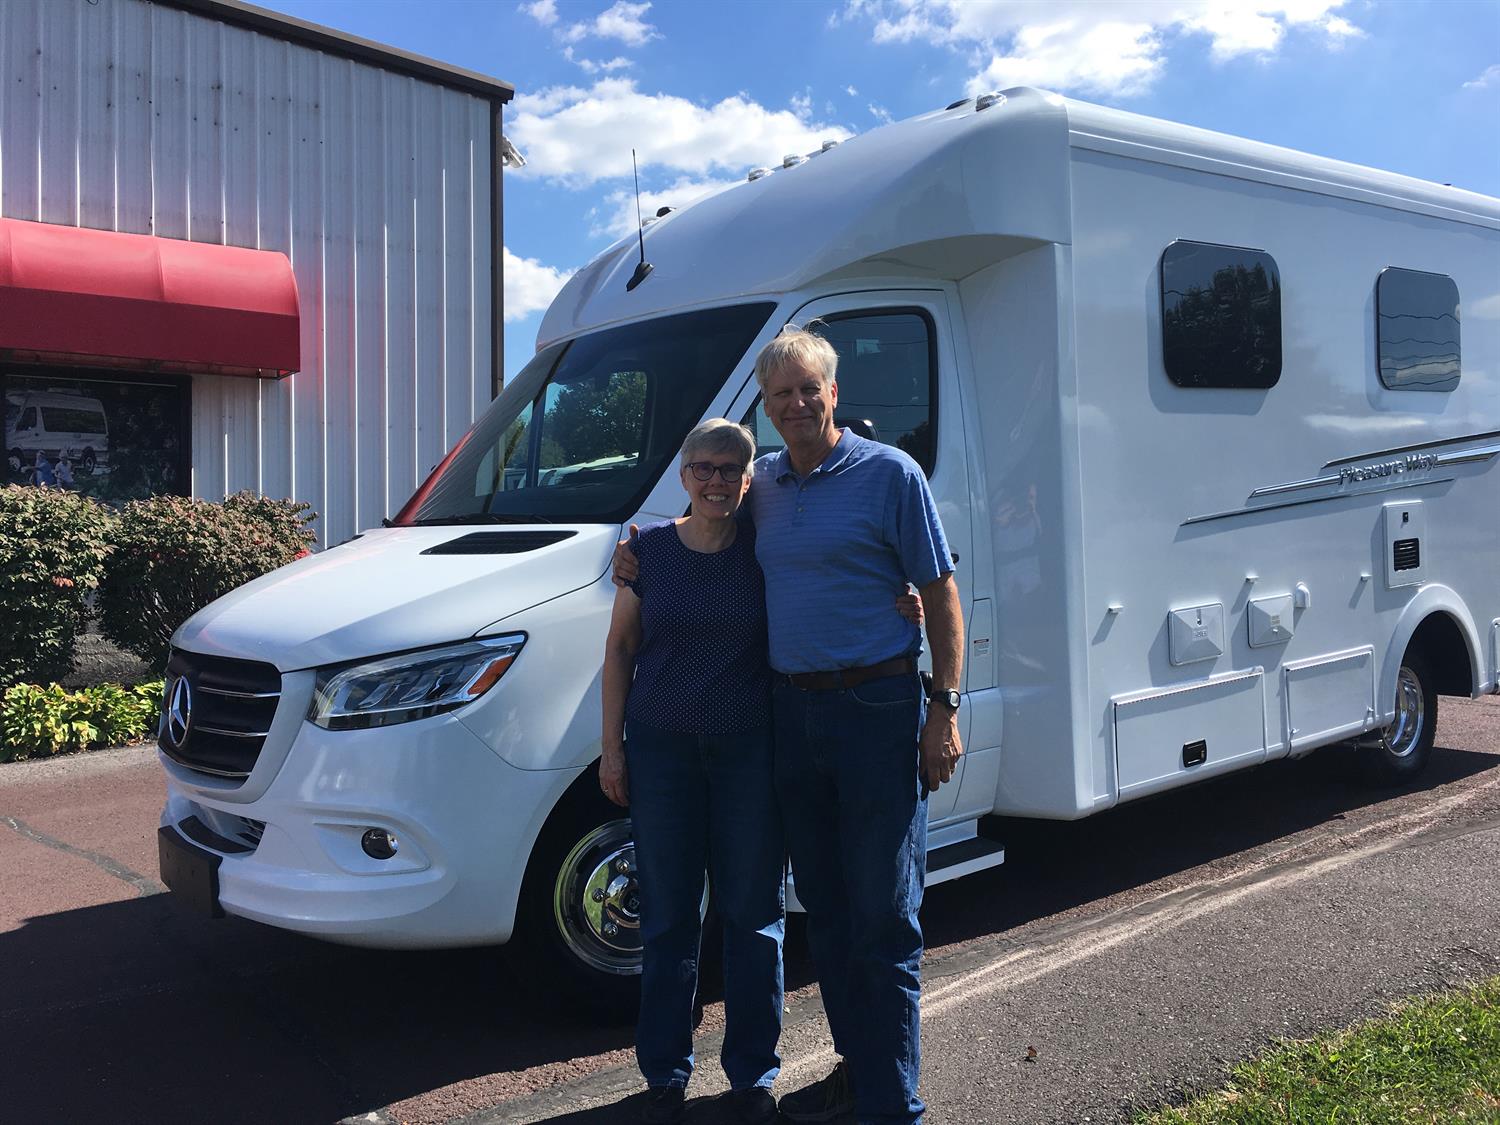 Congratulations Tony and Sue! The open road awaits you and your new